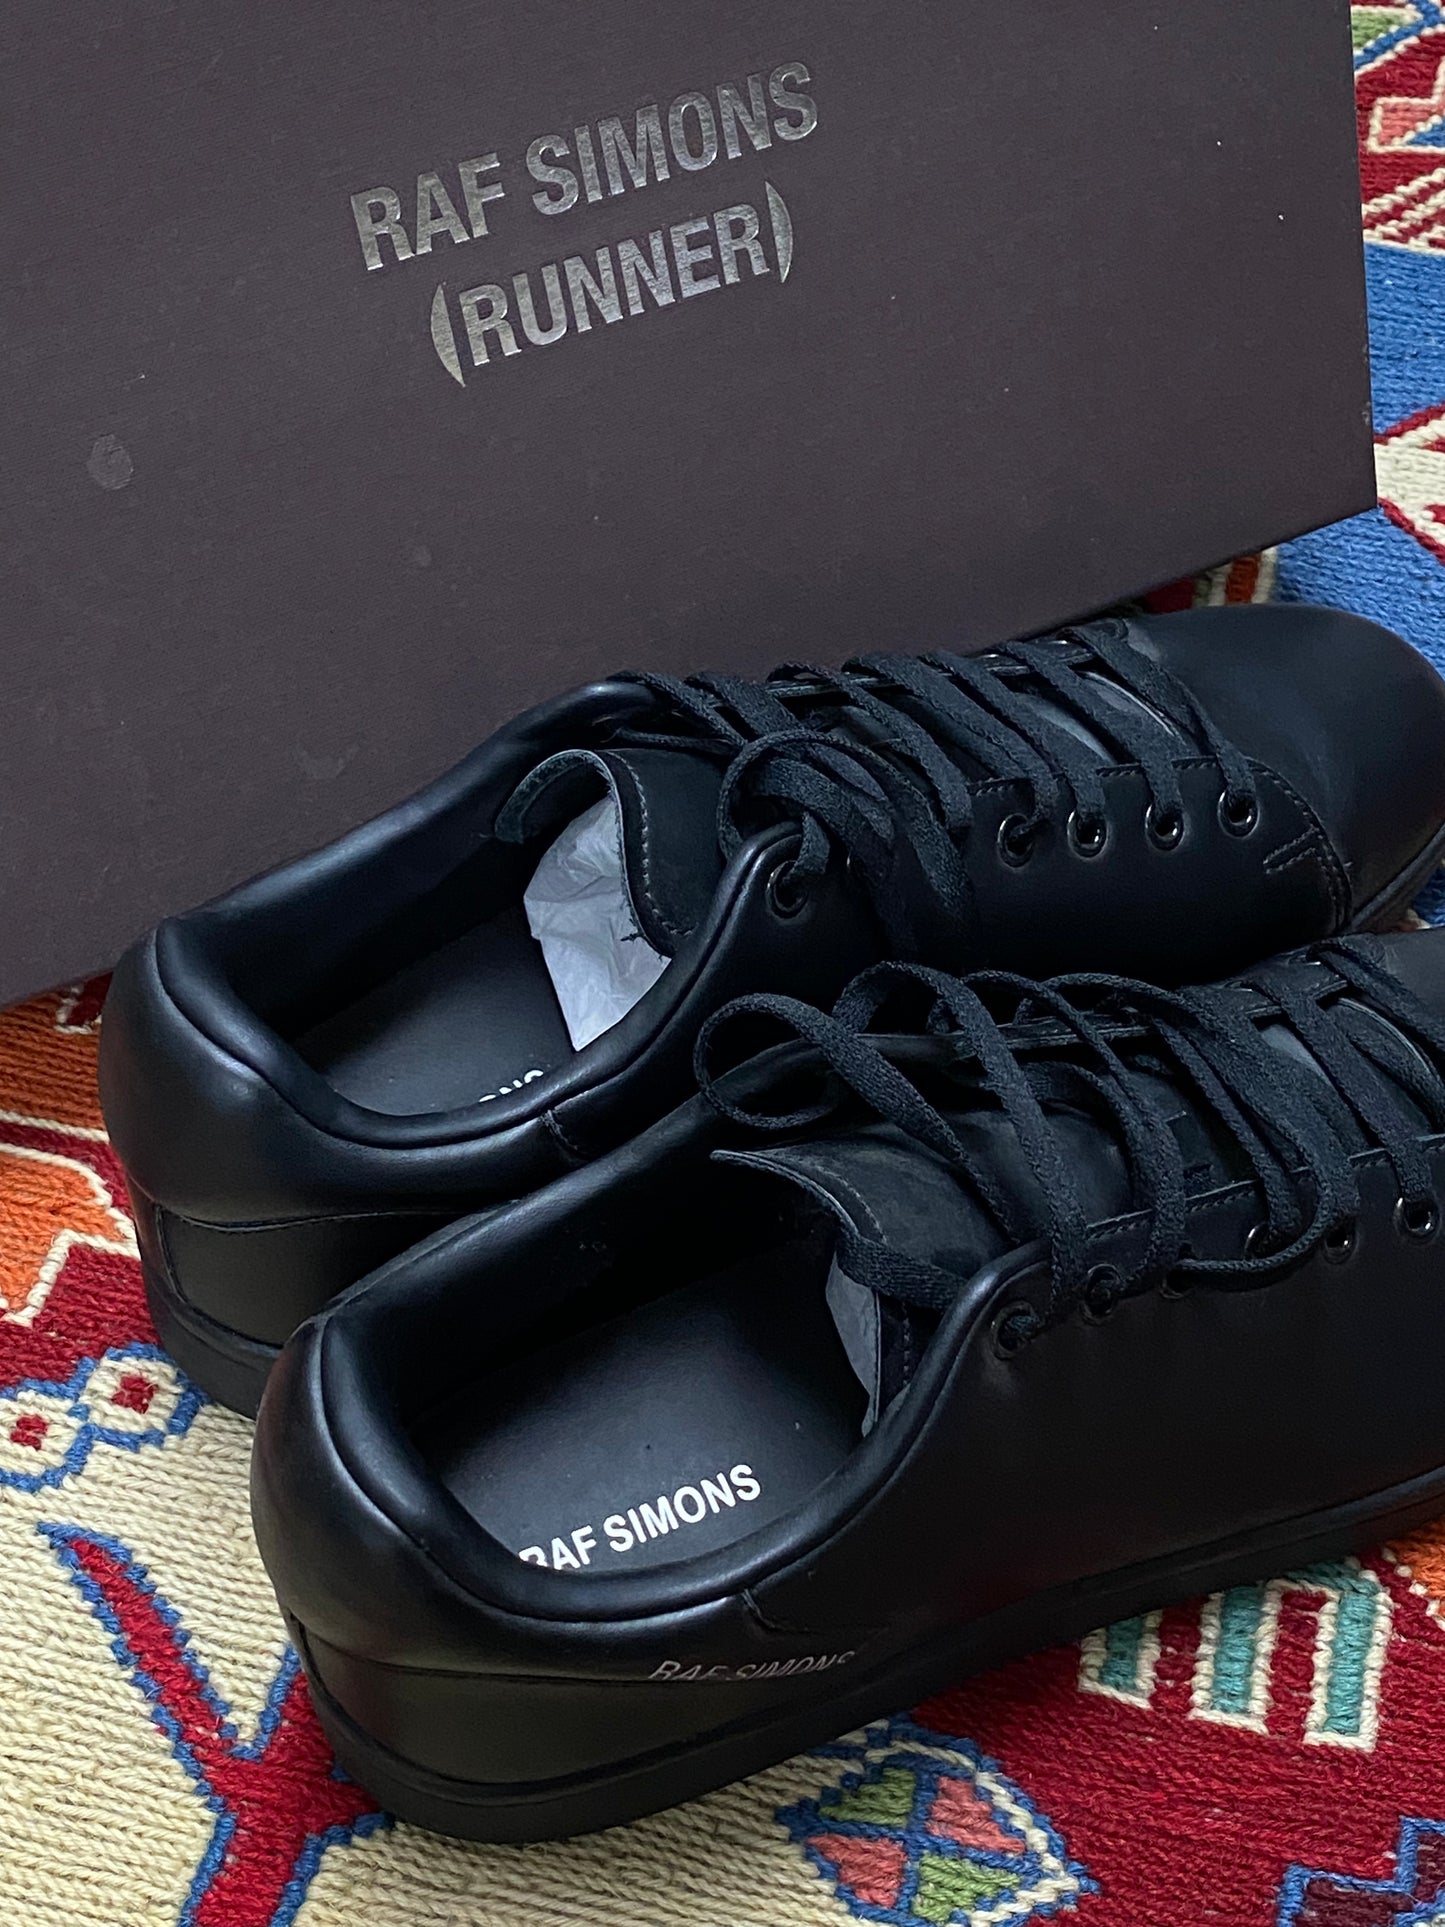 RAF SIMONS ORION LEATHER SNEAKER. (44)